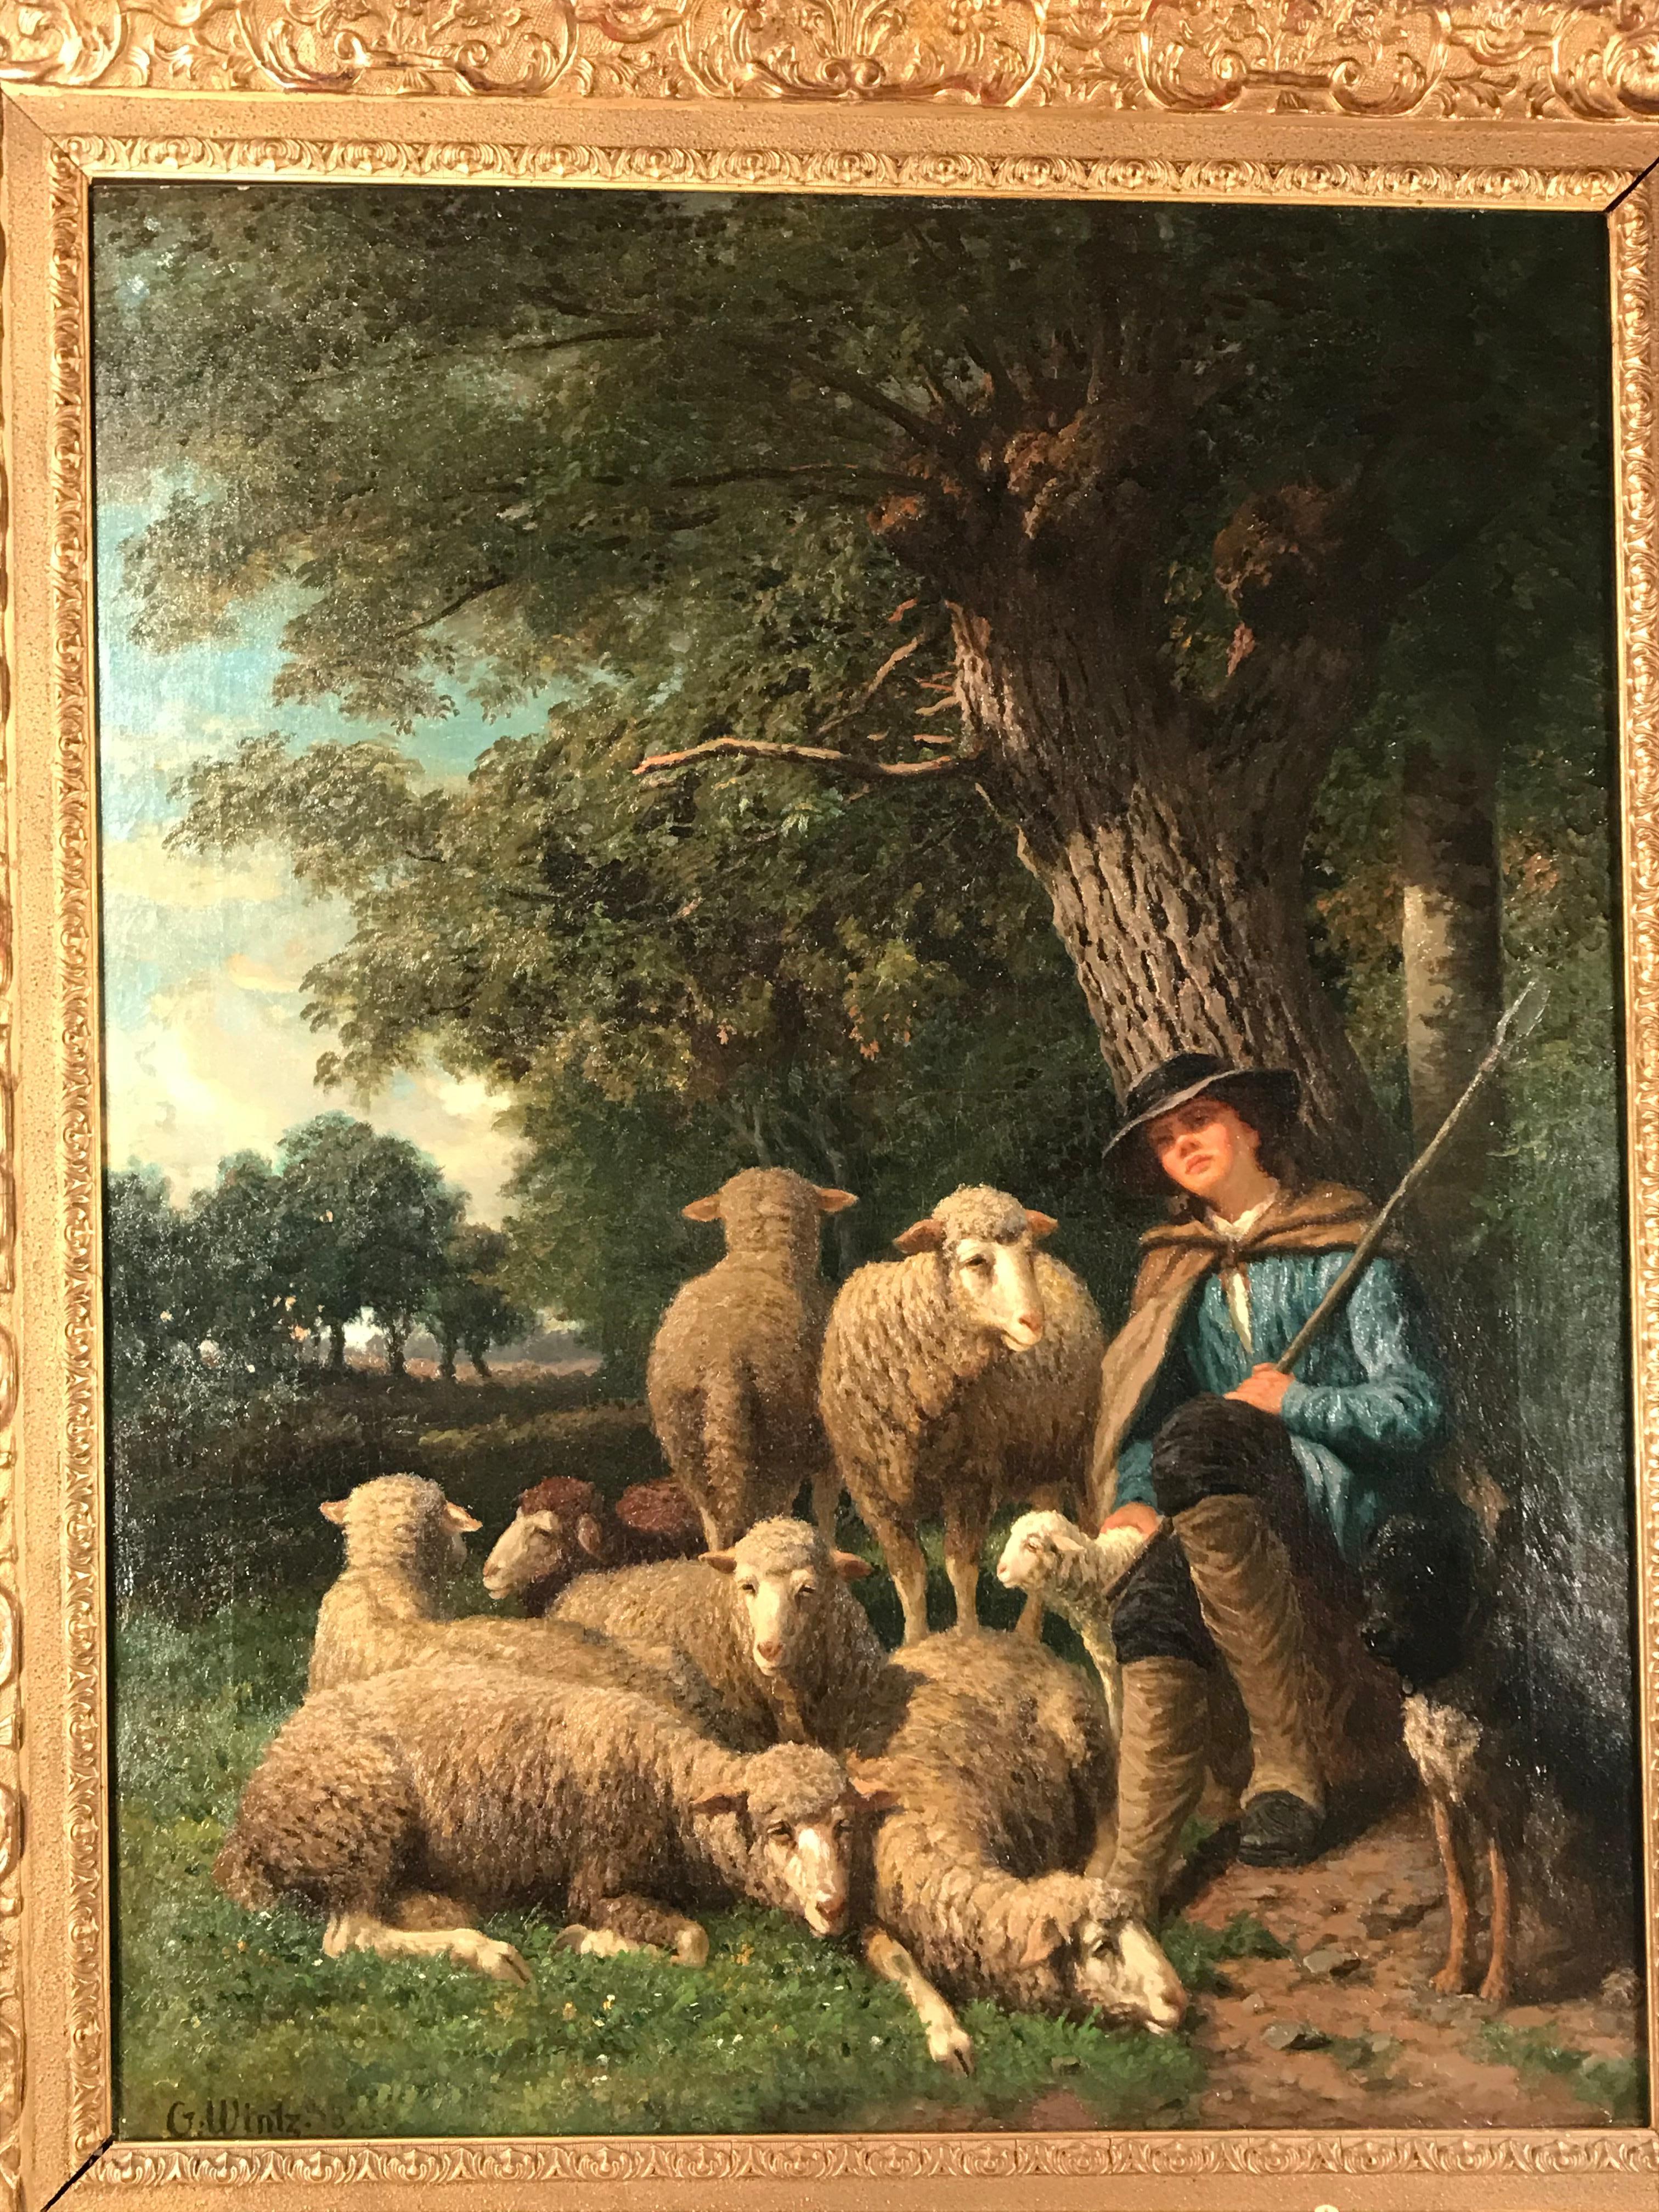 Painting by Guillaume Wintz (1833-1829), shepherd with his flock, oil on canvas 36.34 x 28.93 inches (92.5 x 73.5 cm), signed and dated 1883. The painting ships from Germany.